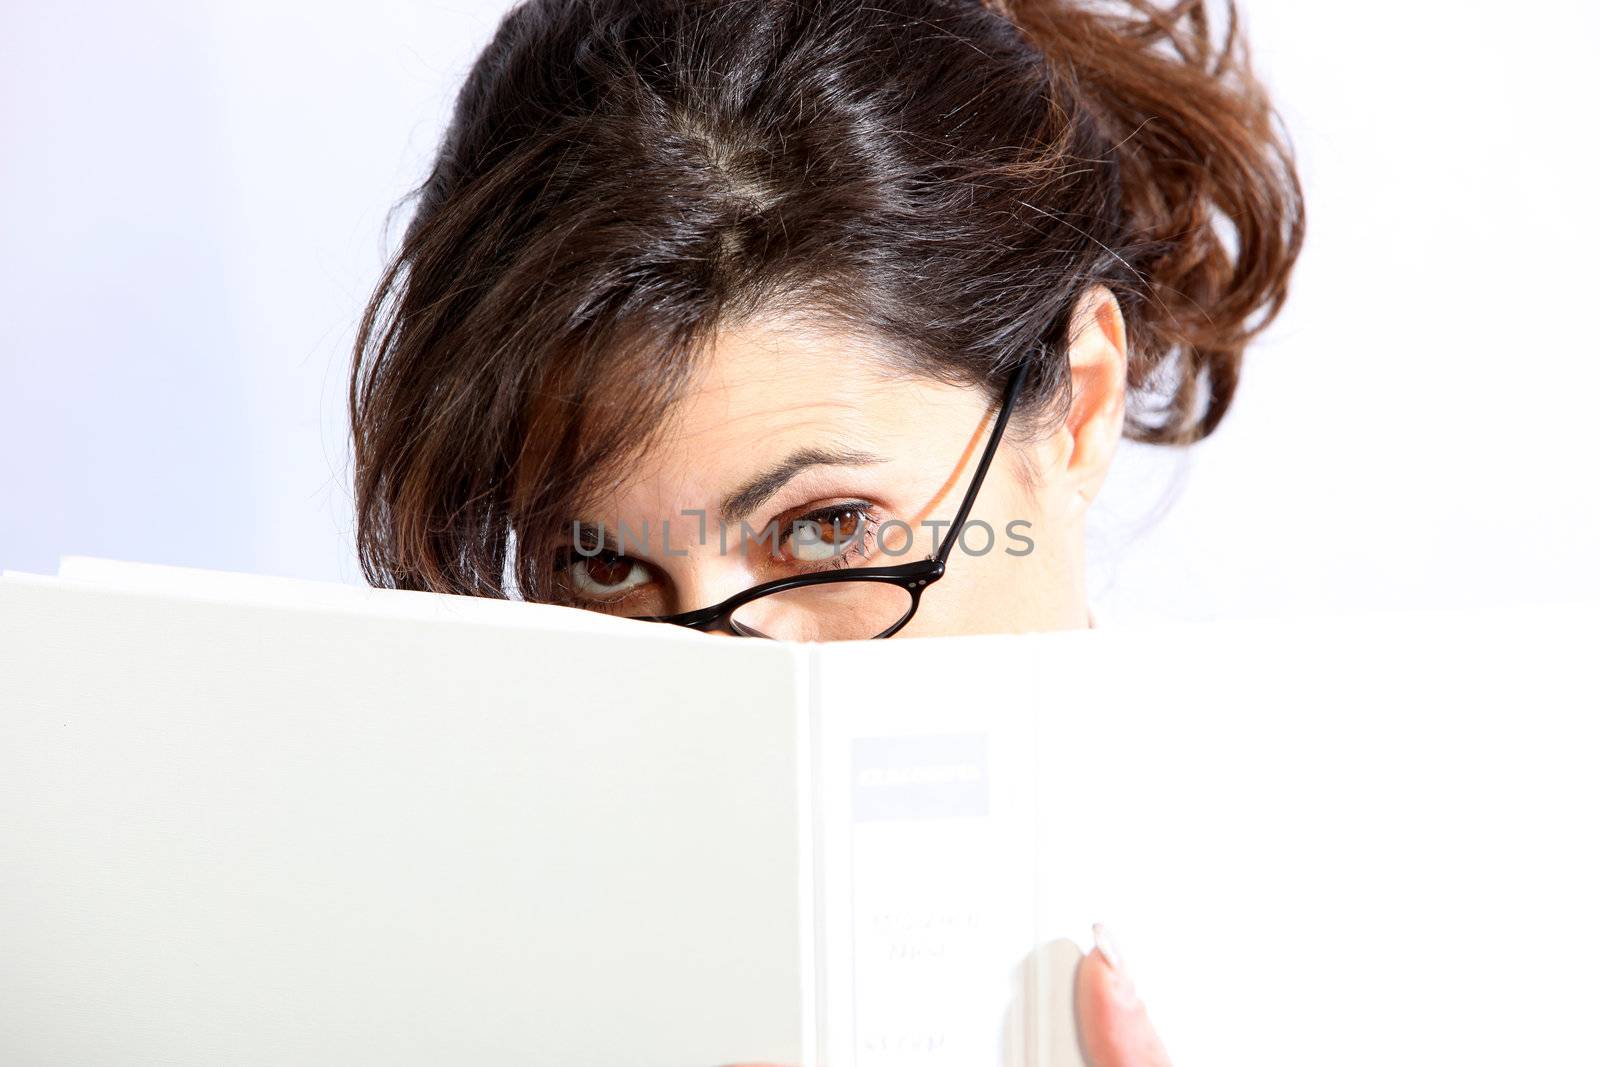 A young woman hides behind a folder / book and peeps away, frowning on the Folder